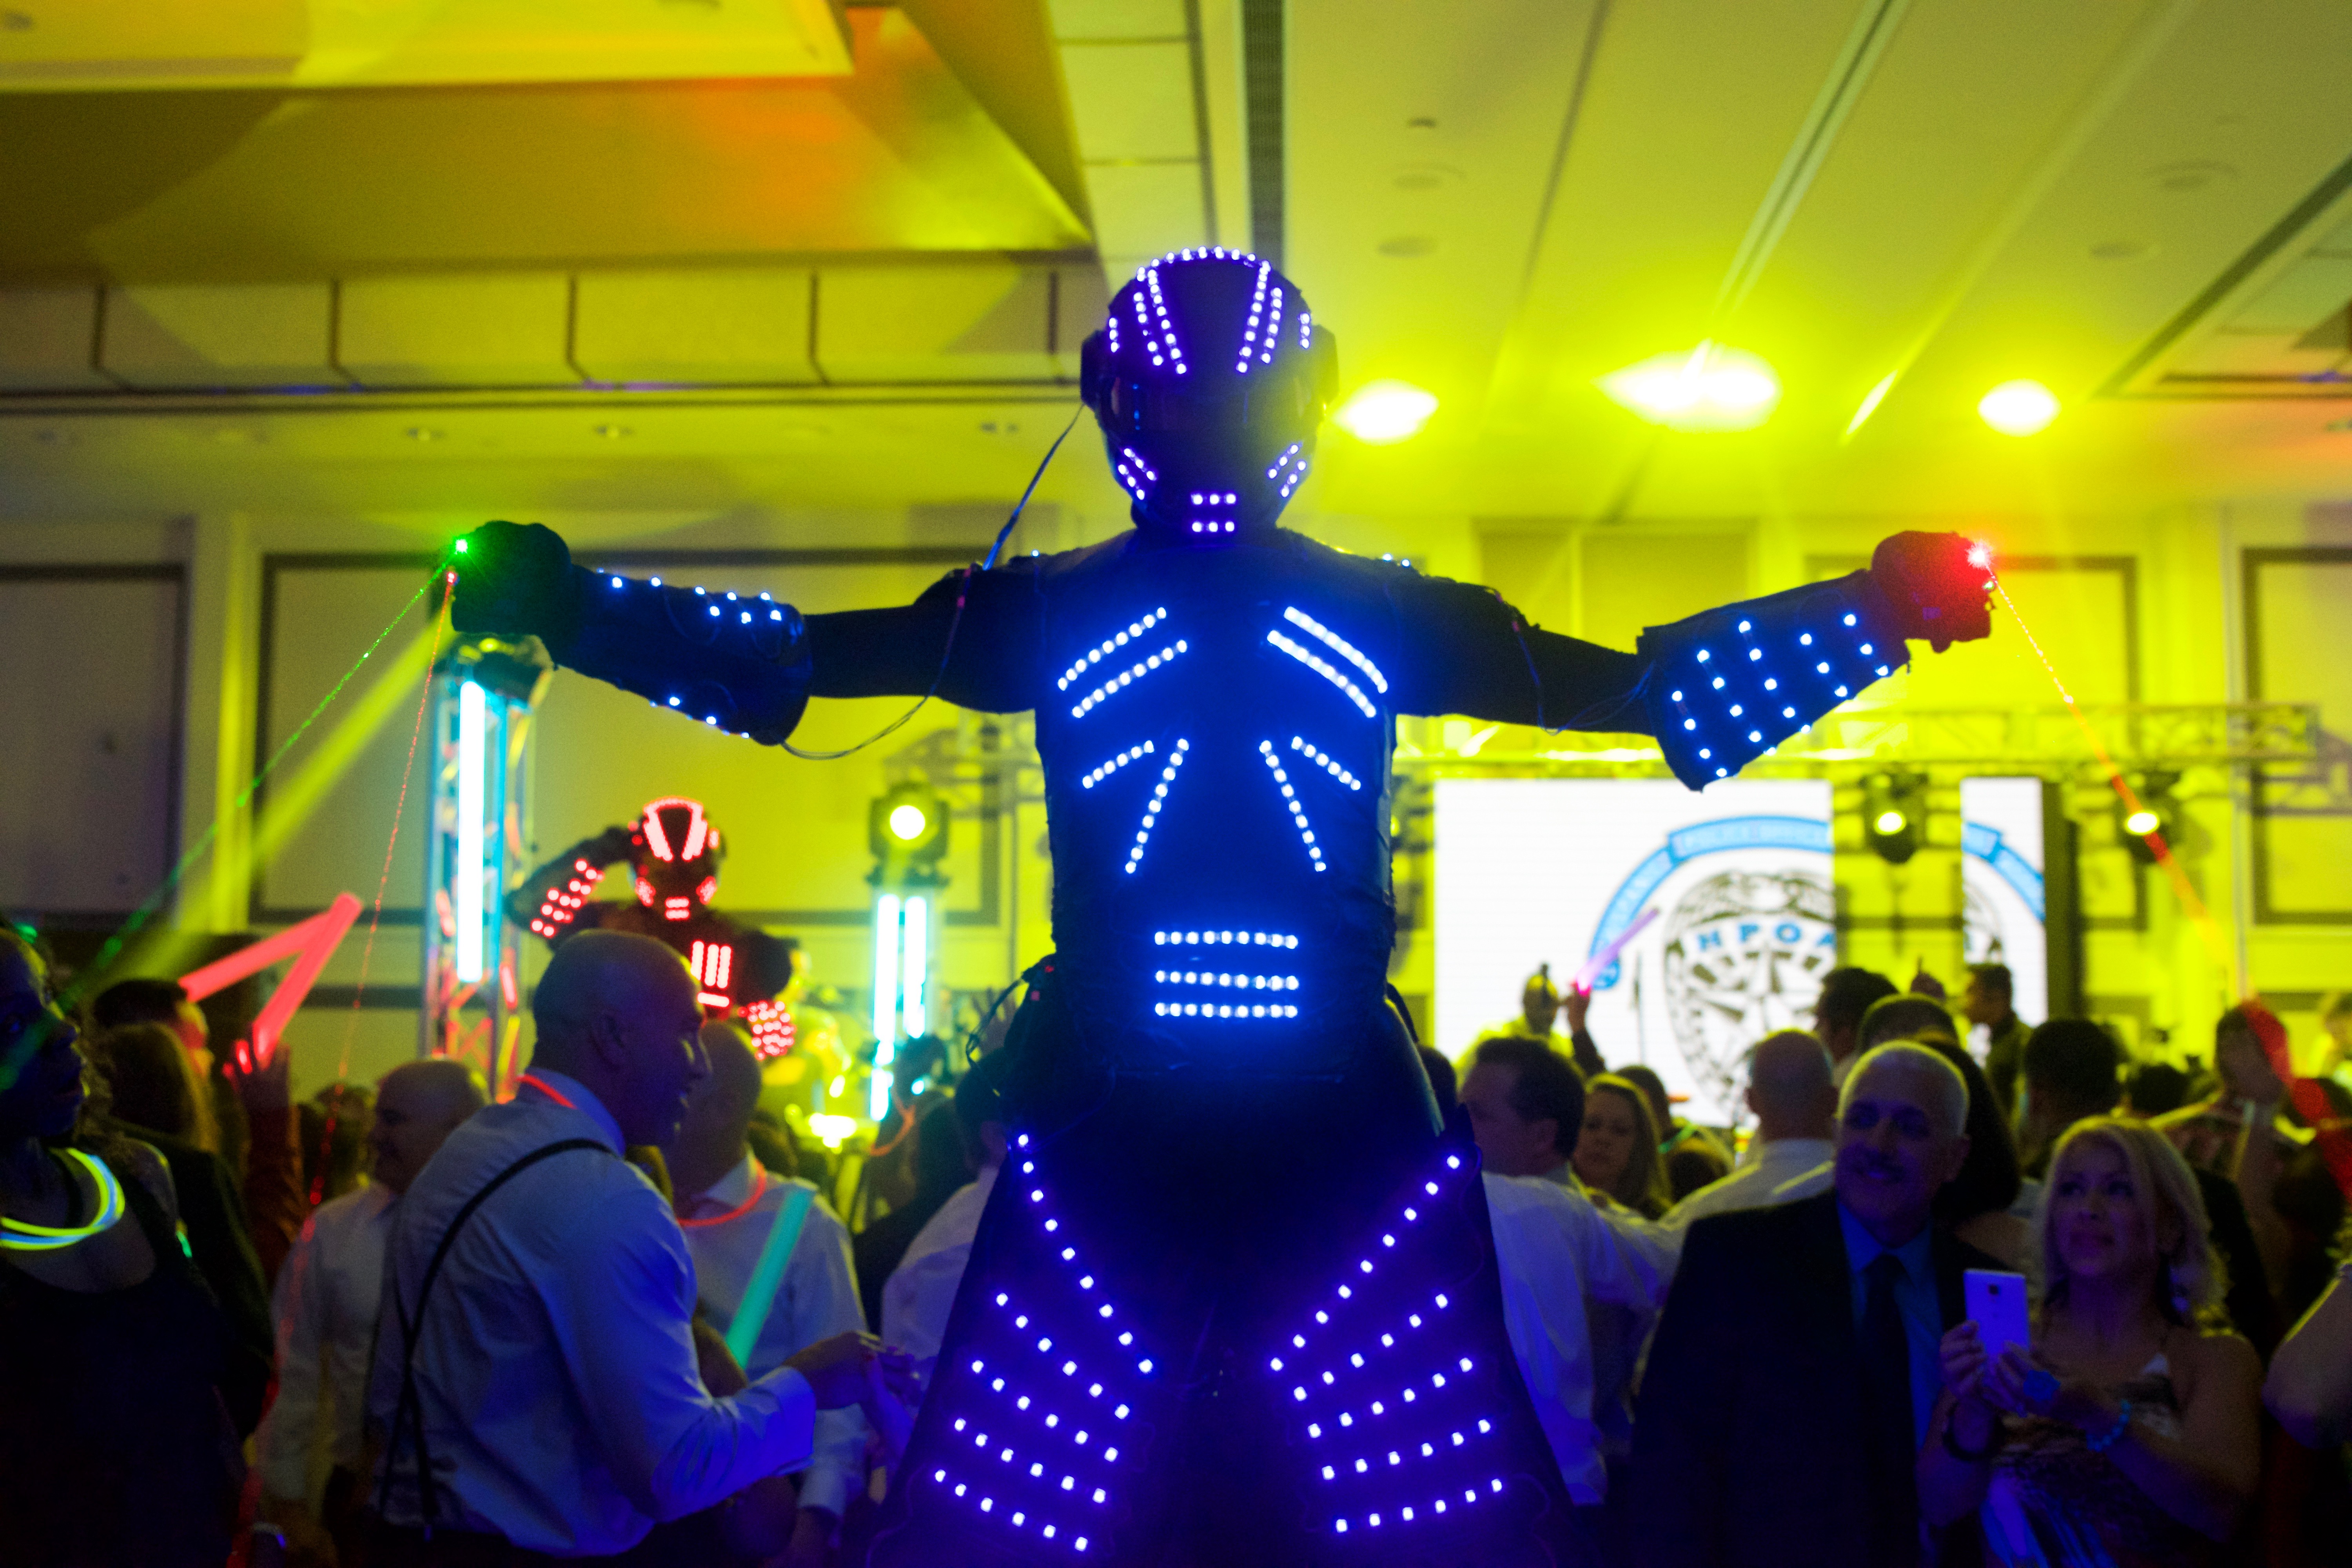 An LED robot makes a big impression, entertaining at a corporate event